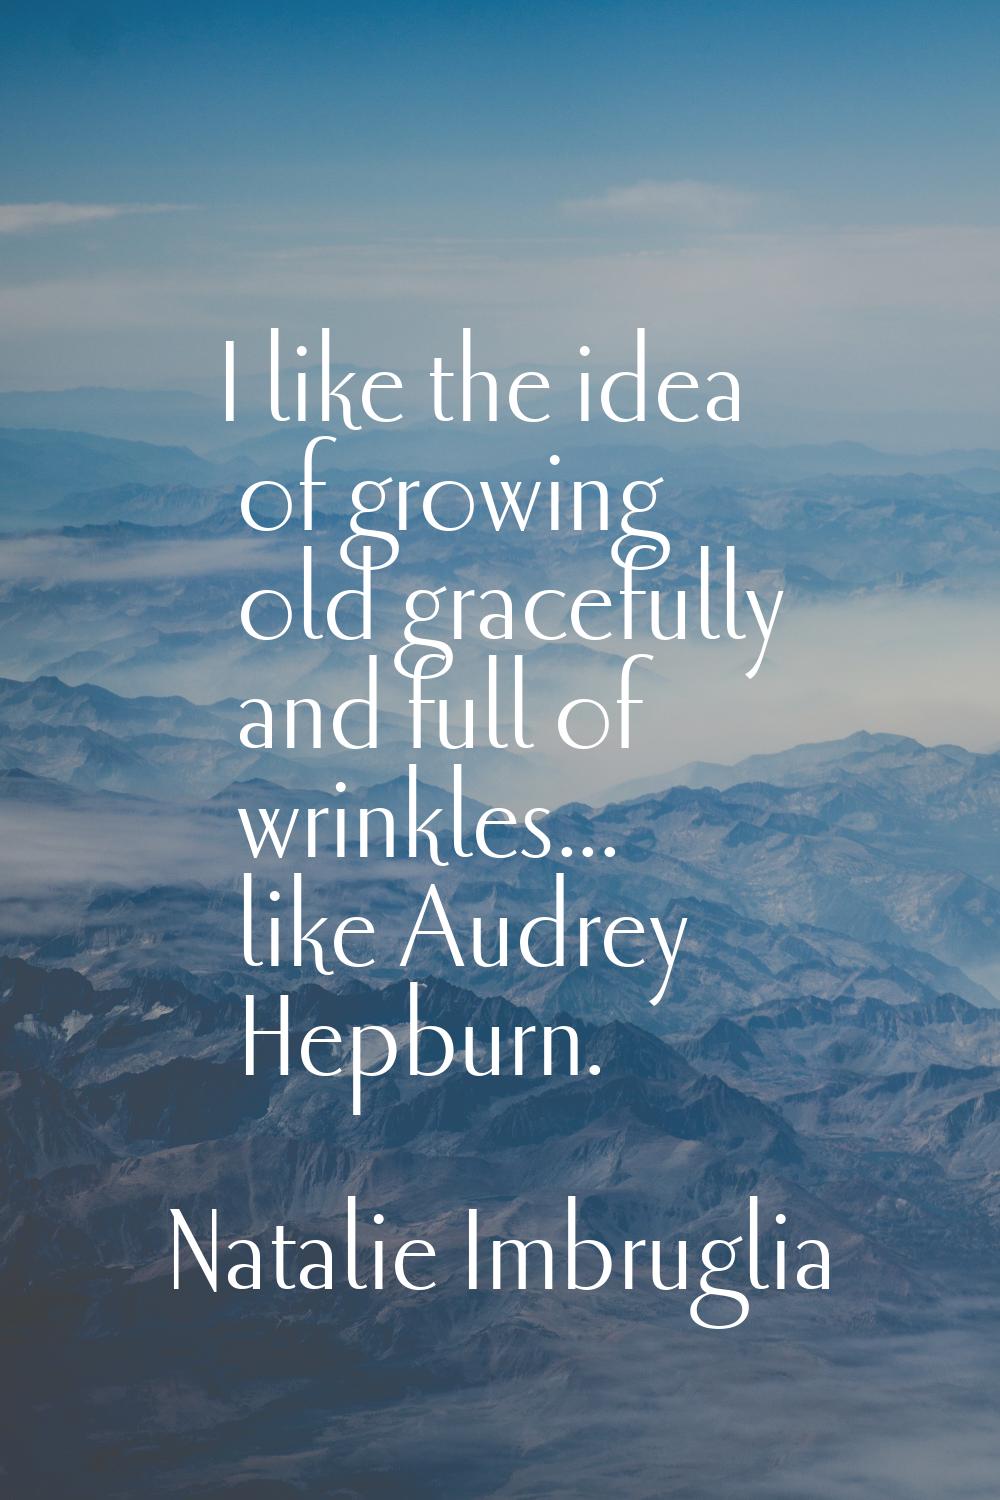 I like the idea of growing old gracefully and full of wrinkles... like Audrey Hepburn.